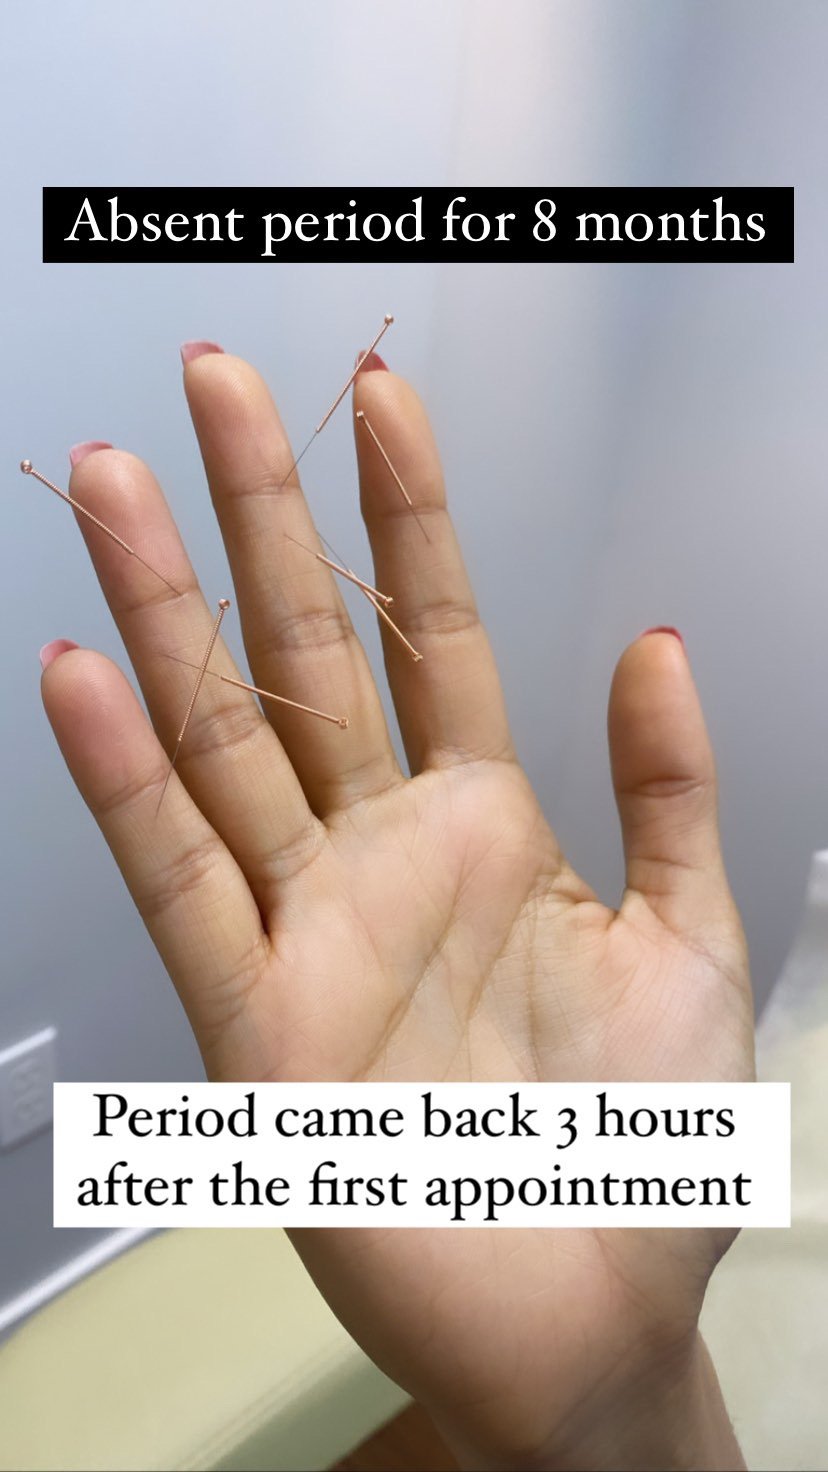  SuJok Acupuncture based in Vancouver at Alla Ozerova Acupuncture Clinic used to treat Reproductive System Conditions. Patient’s period was absent for 8 months. Period came back after 3 hrs after first appointment.  